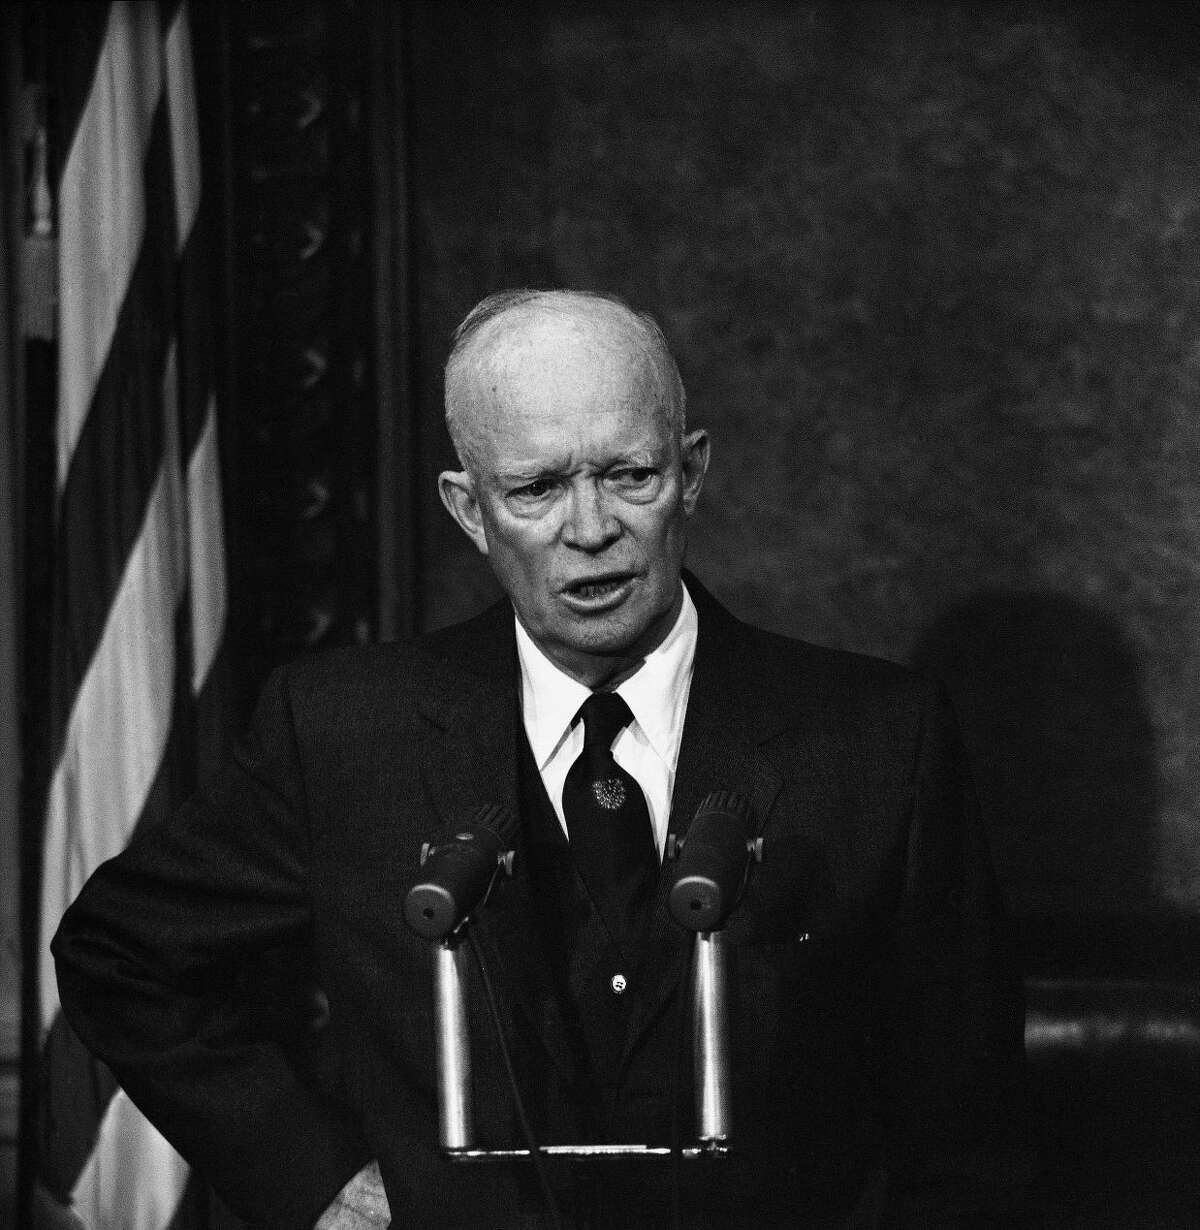 FILE - In this Dec. 10, 1958 file photo, President Dwight Eisenhower speaks during a news conference in Washington. A gay rights group sued the Justice Department on Wednesday, April 27, 2017, for failing to produce hundreds of pages of documents related to a 1953 order signed by President Dwight Eisenhower that empowered federal agencies to investigate and fire employees thought to be gay. (AP Photo/Bill Allen, File)